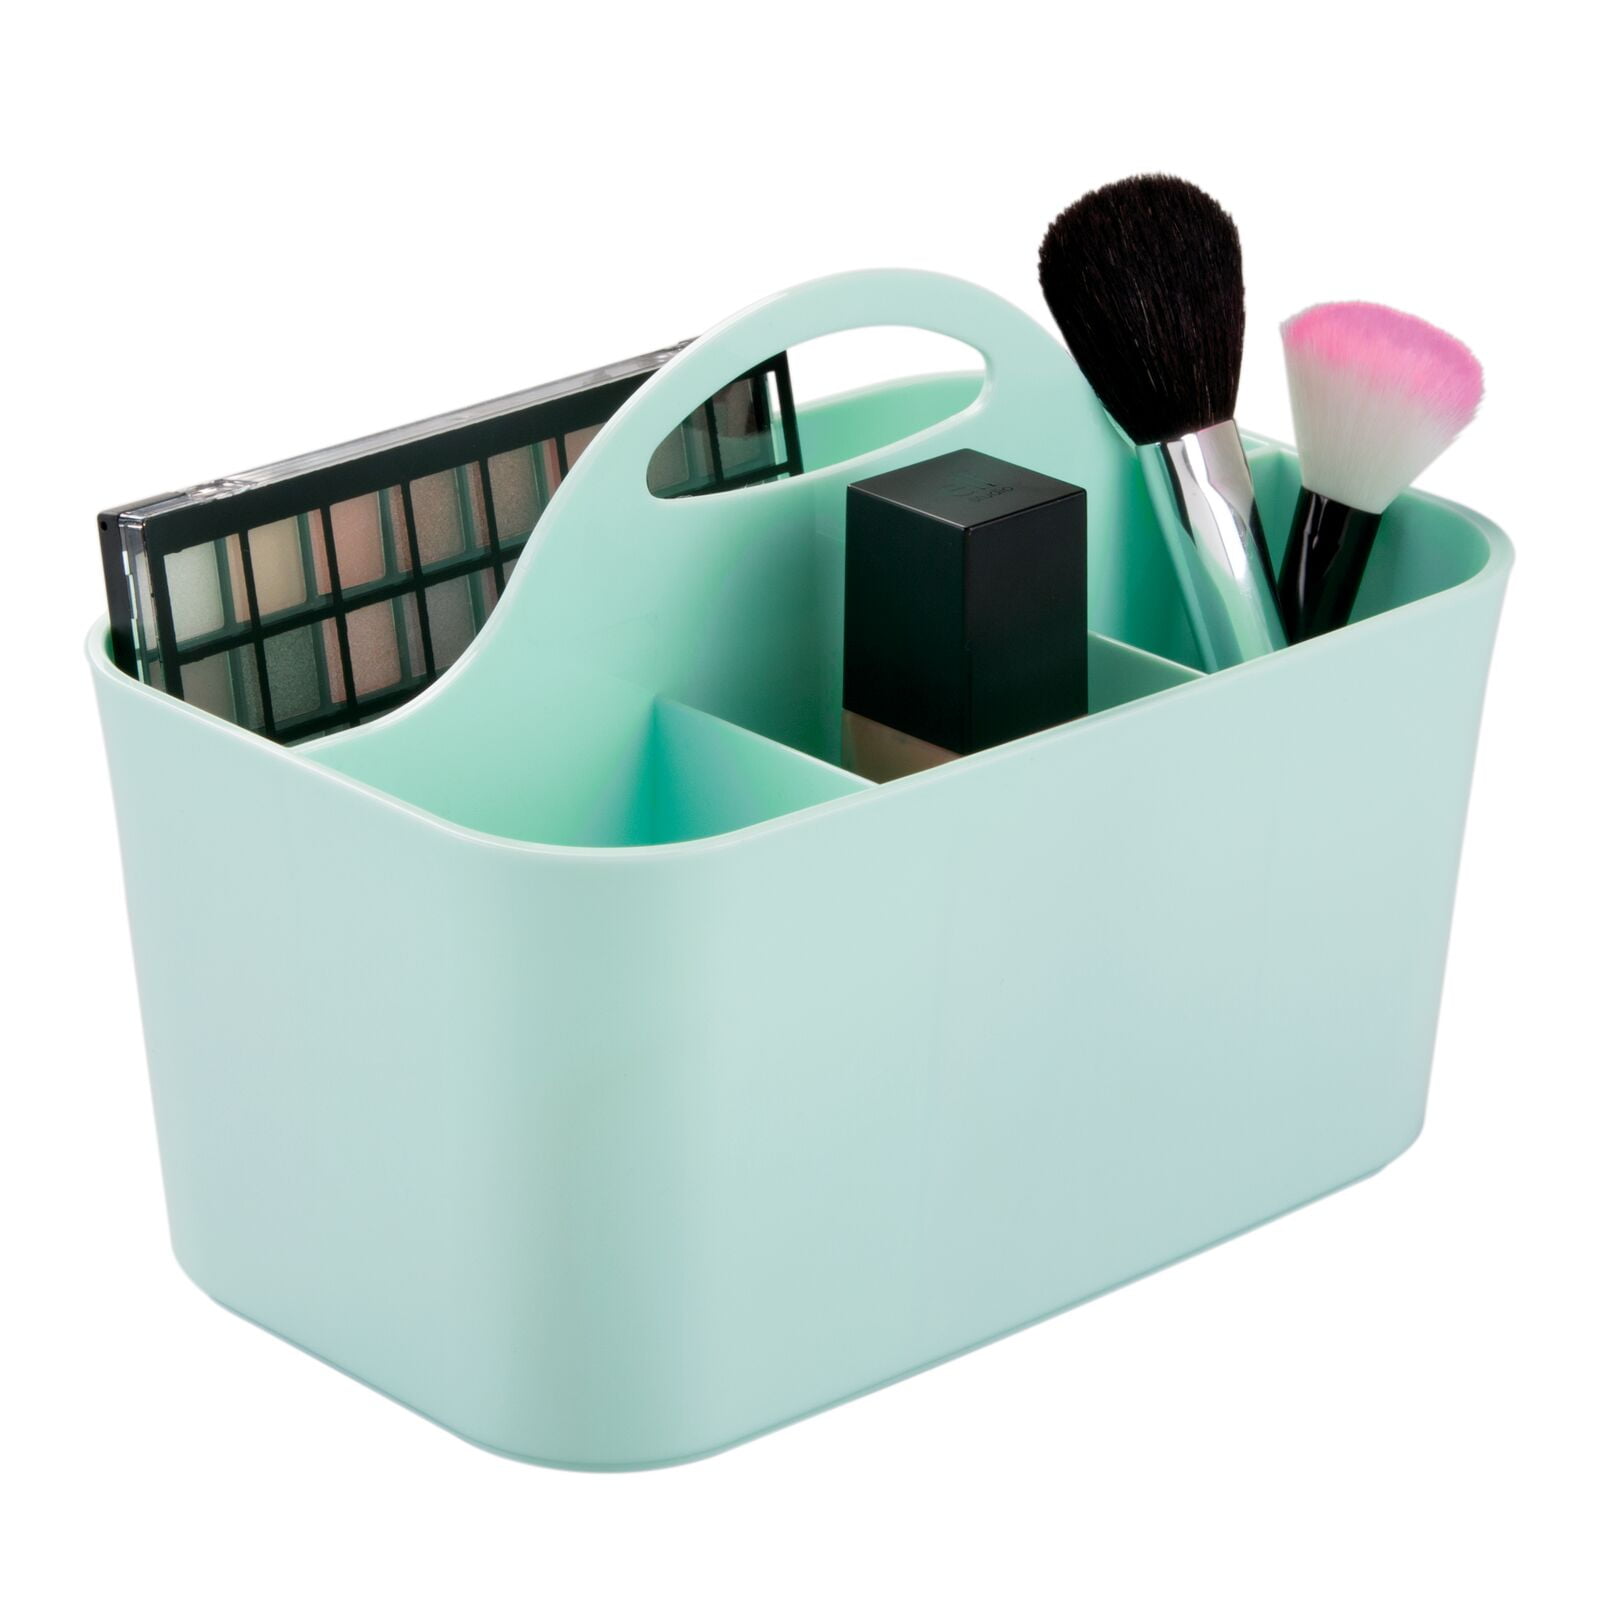  Organizer Bag for Hair Care and Bathroom Accessories  Holder  Tool and Storage Caddy for Dorms, Hair Salon and Accessories : Home &  Kitchen